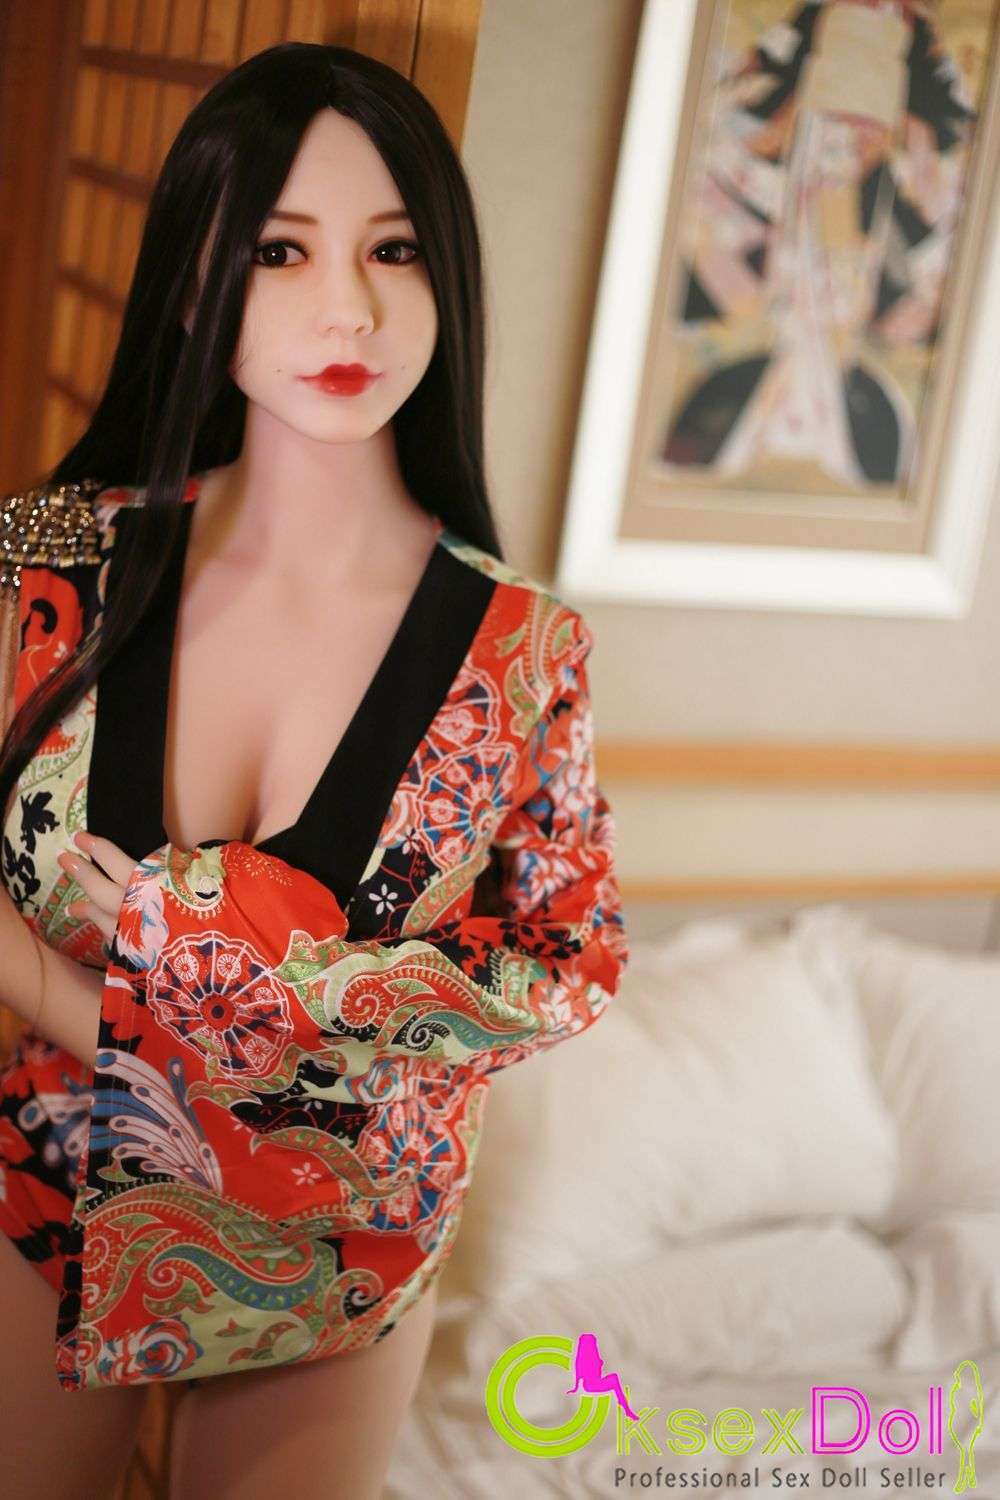 168cm real doll pic